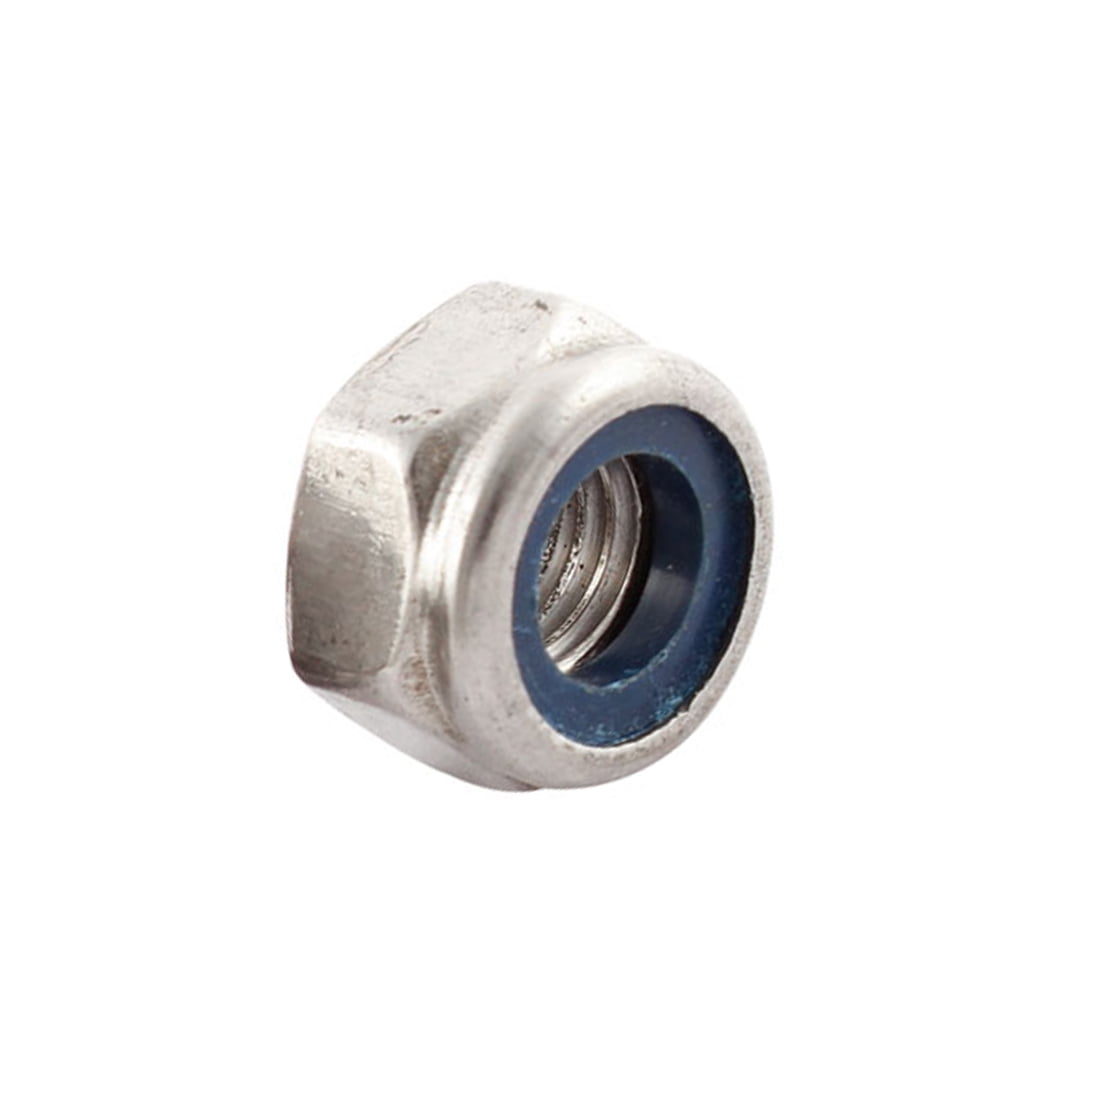 M10-1.5 Metric Coarse Thread Hex Nut A4 Stainless Steel 10mm With 17mm Hex 10